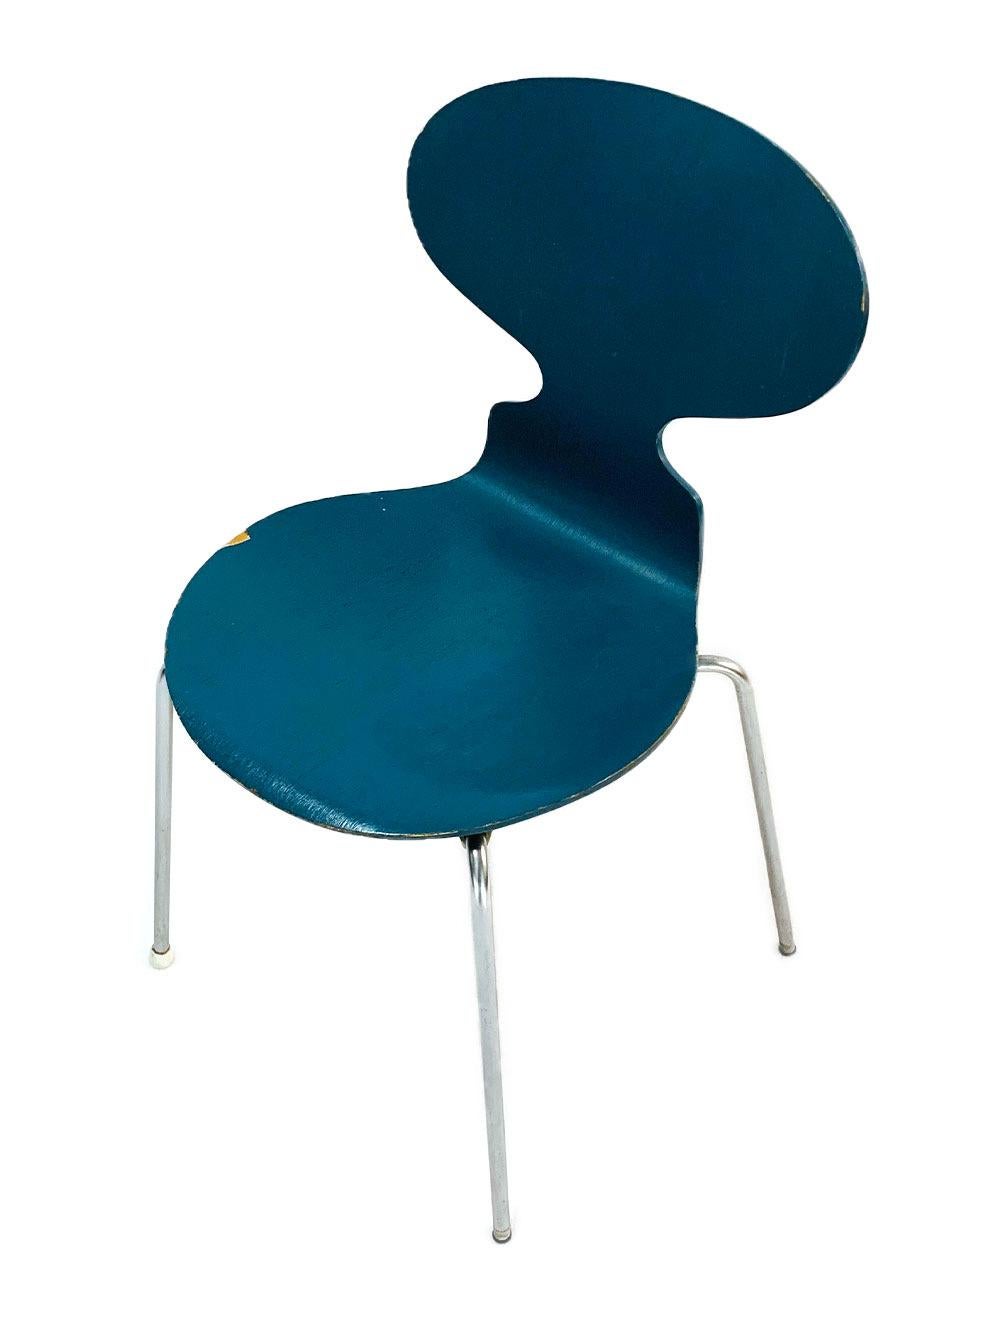 Mid-Century Modern Arne Jacobsen rare set of 6 ant chairs model 3101 manufactured in 1970 by Fritz Hansen in Denmark. Imported from Europe, each ant chair has 4 tubular legs and the body of the chair is original plywood painted a light blue rarely